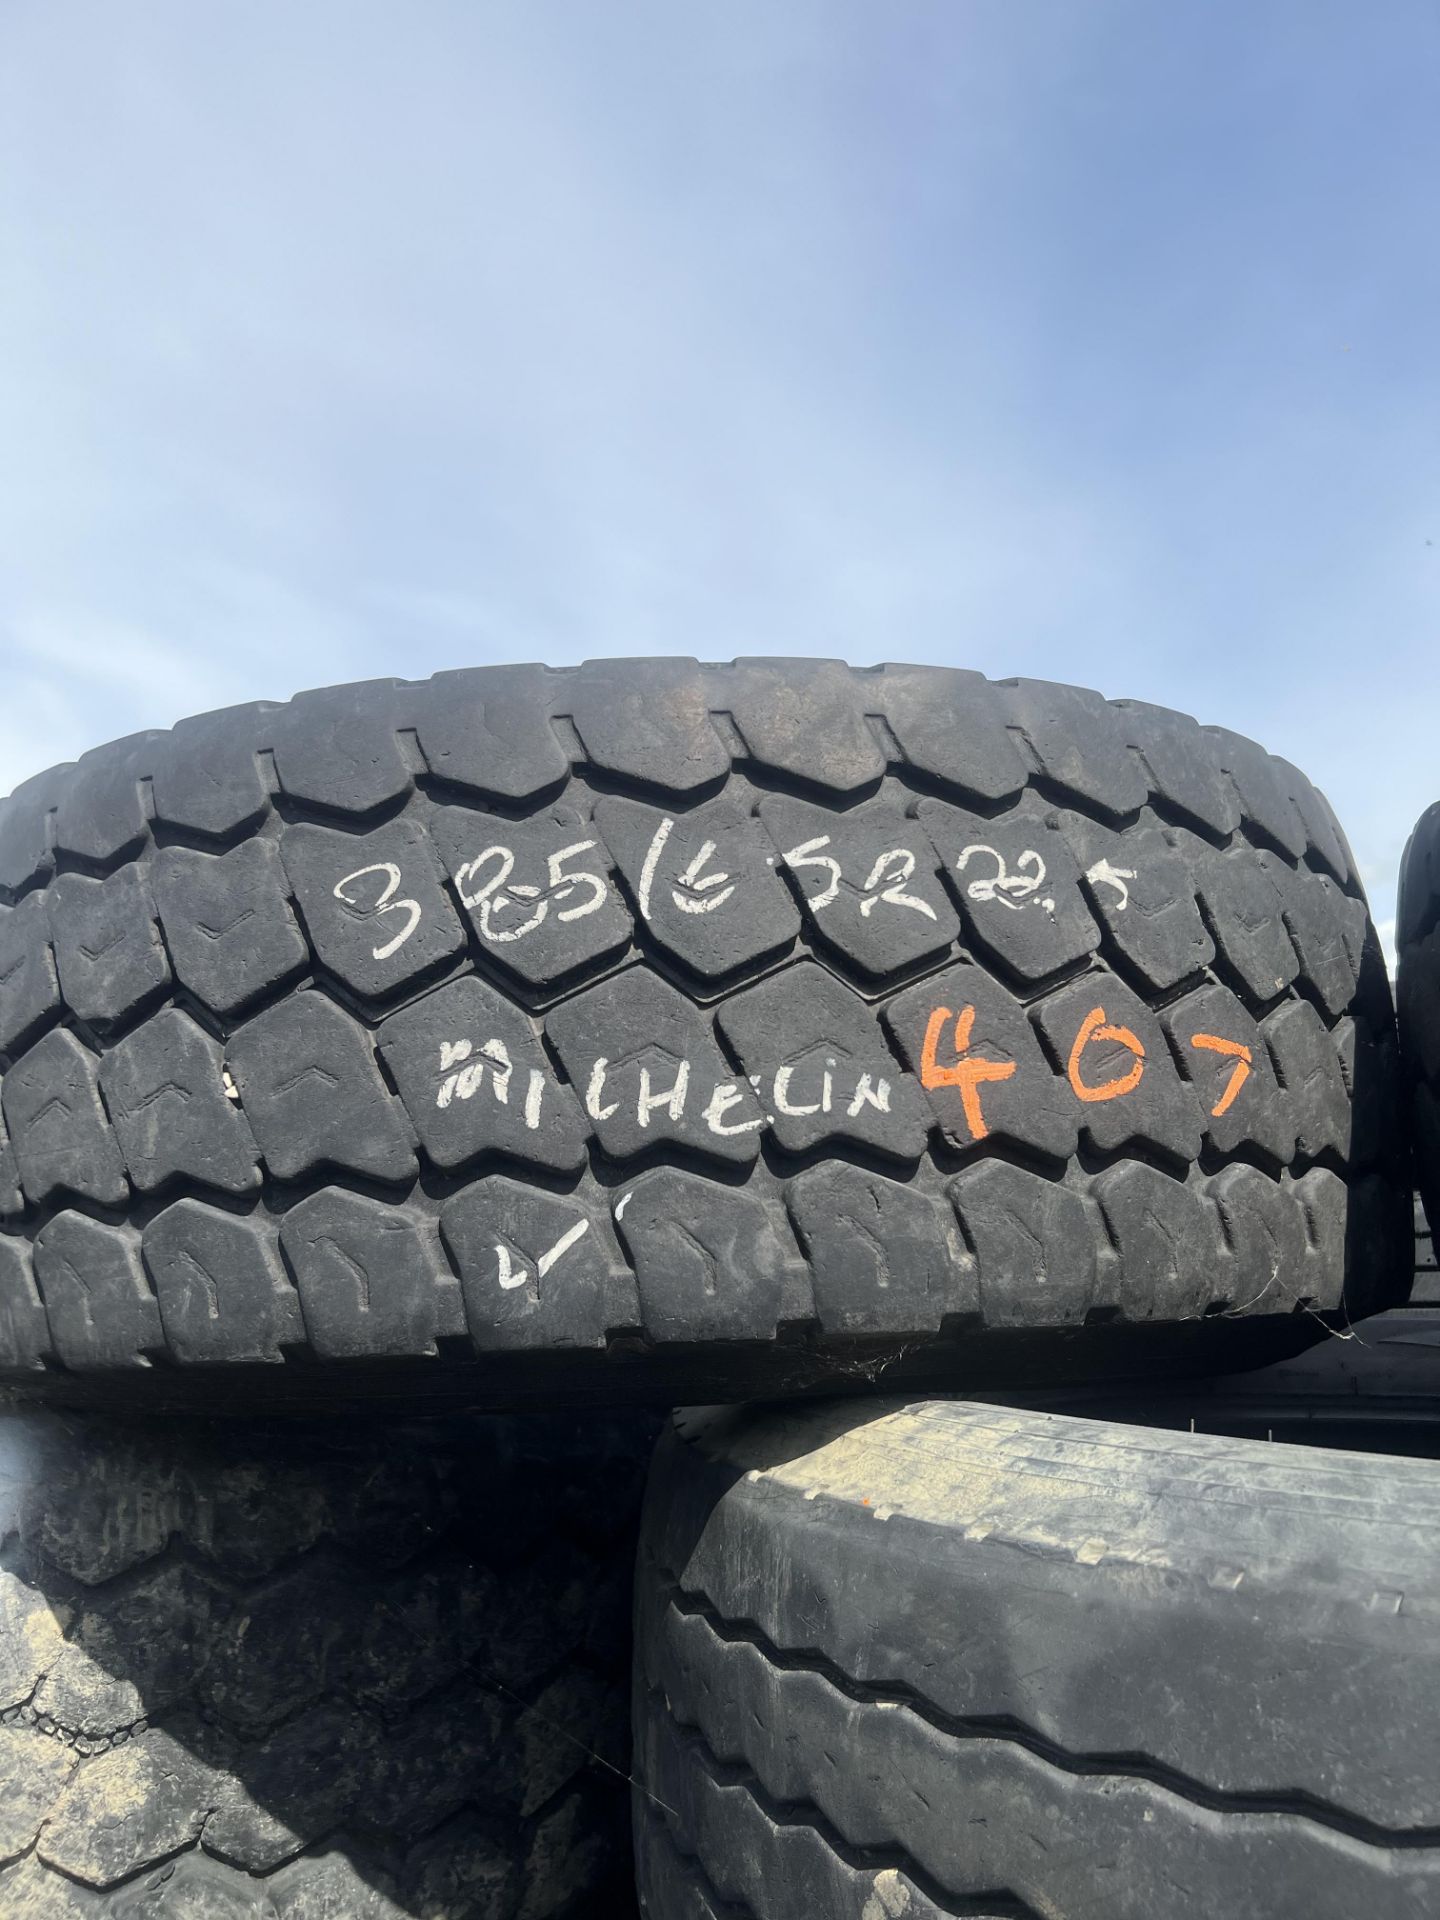 TRUCK_MICHELIN 385/65R22.5 - Image 3 of 3